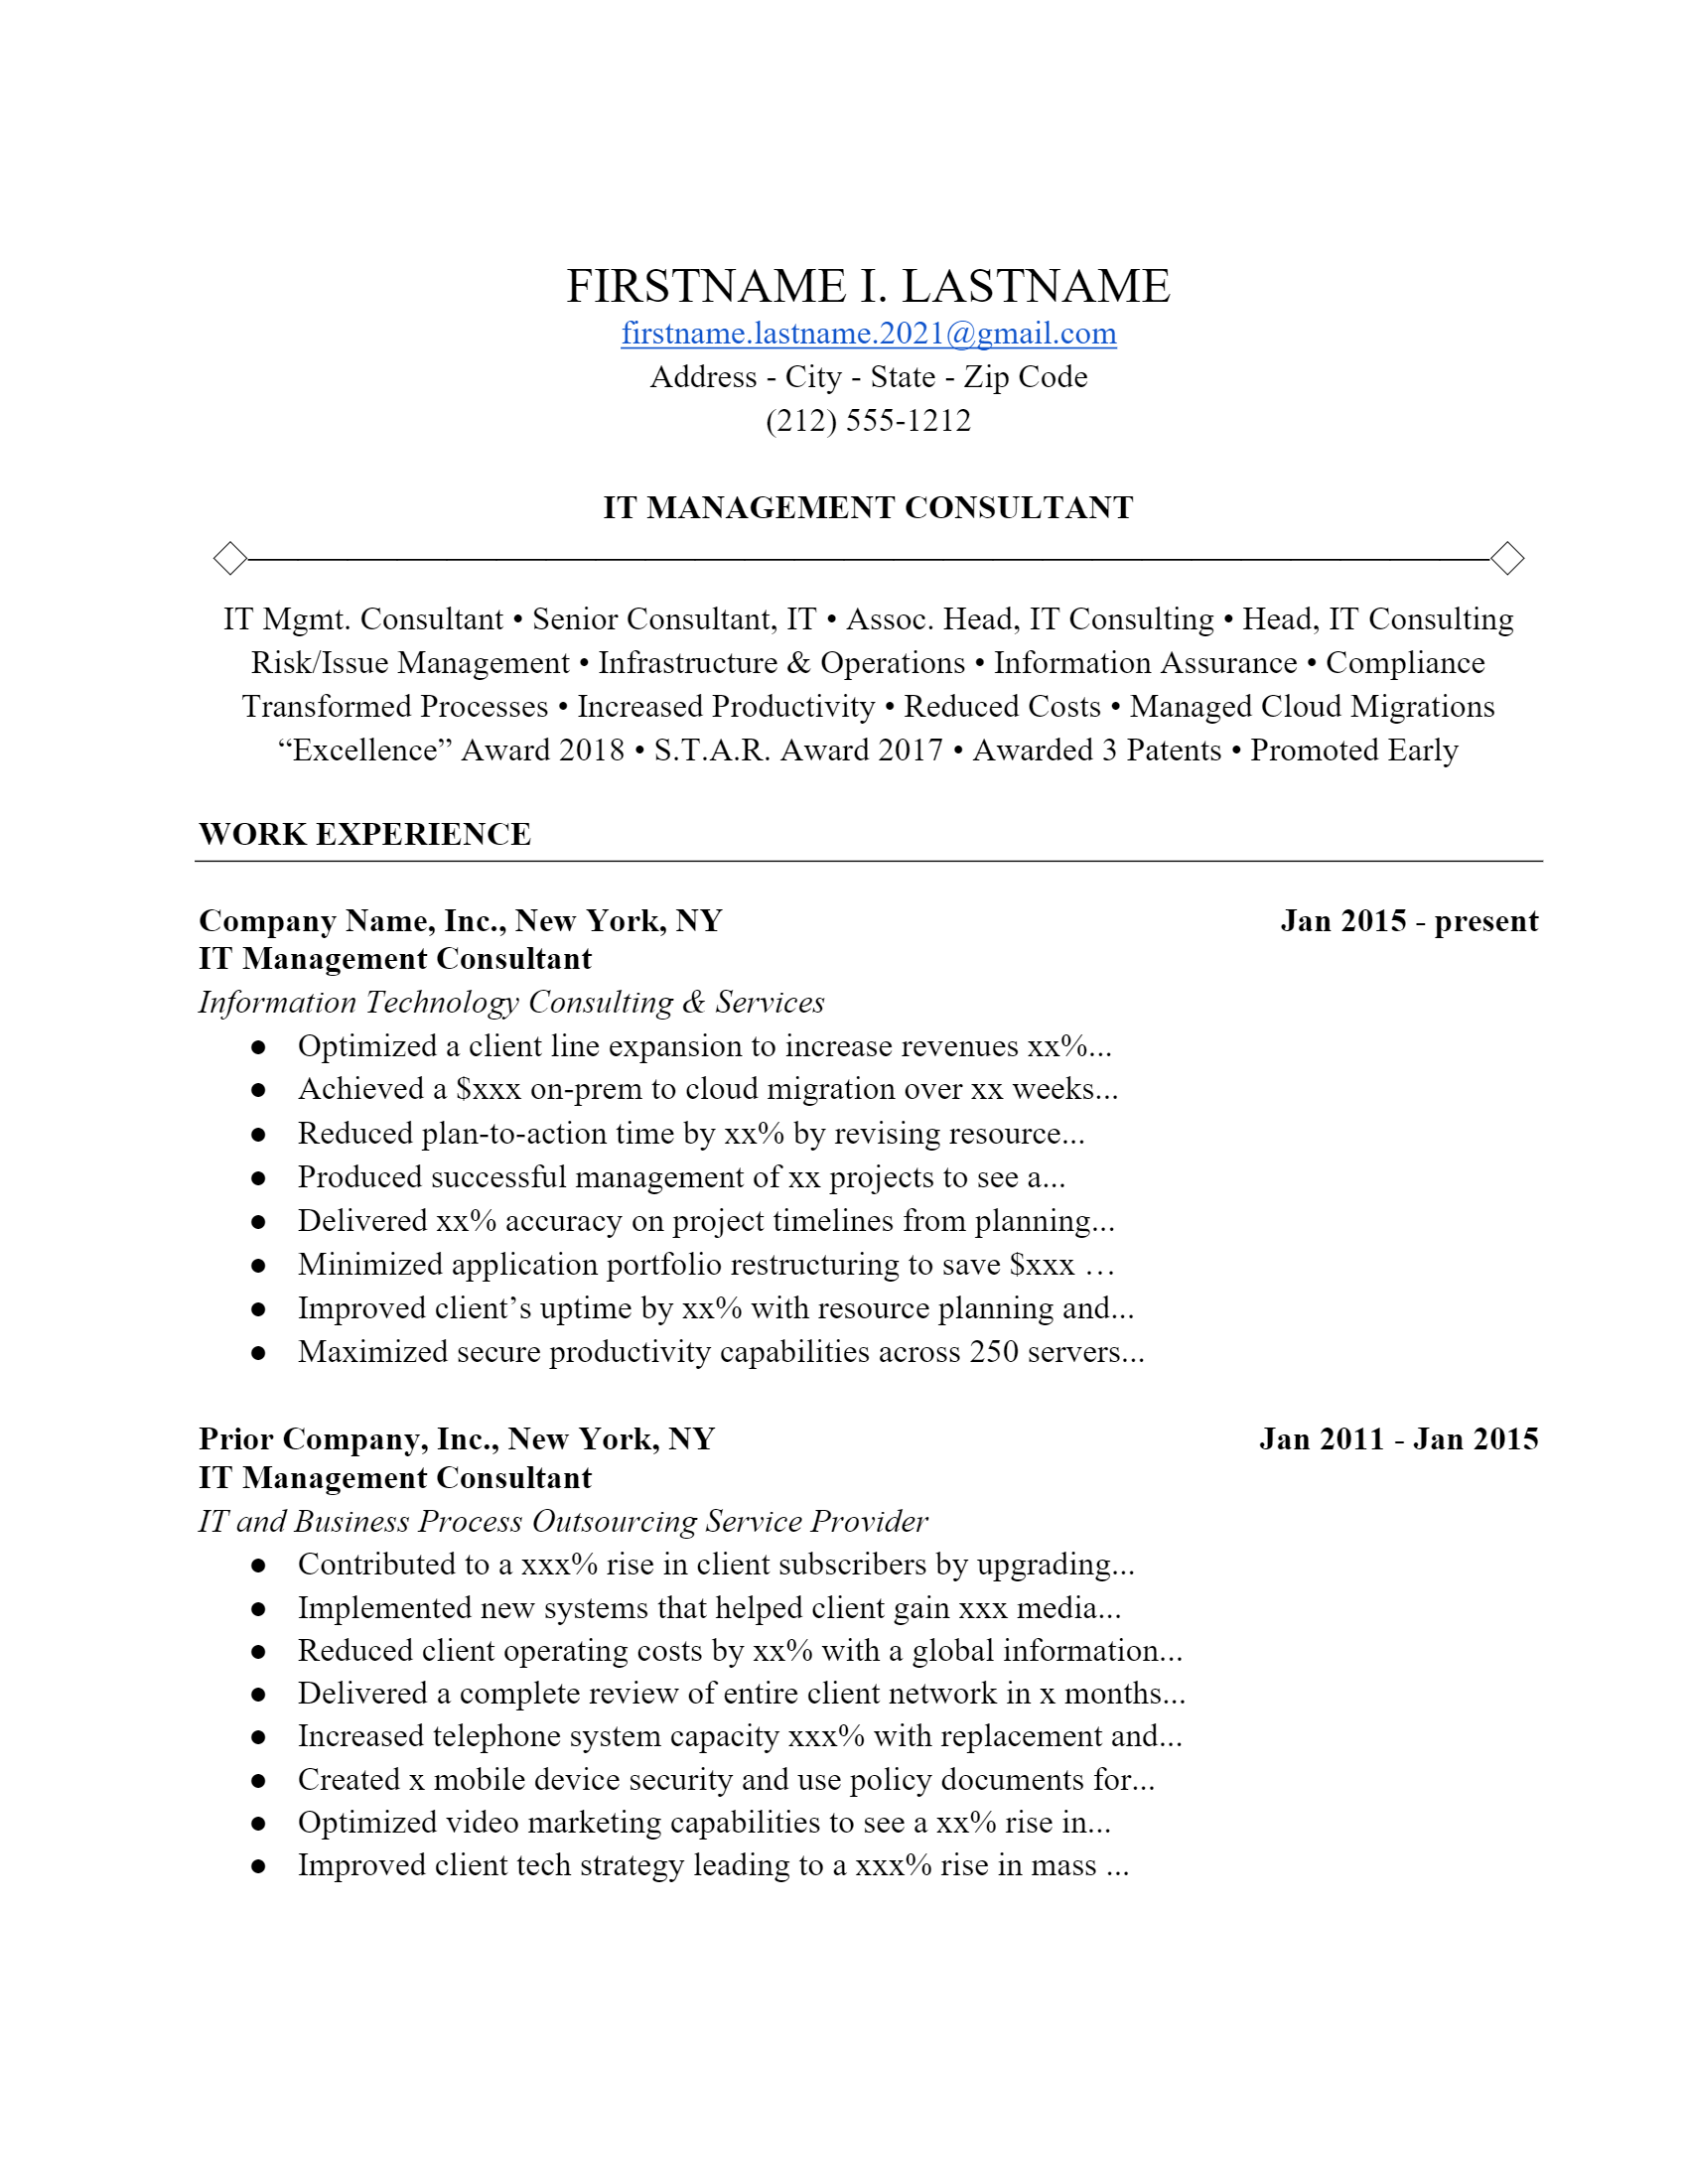 IT Manager Resume .Docx (Word)